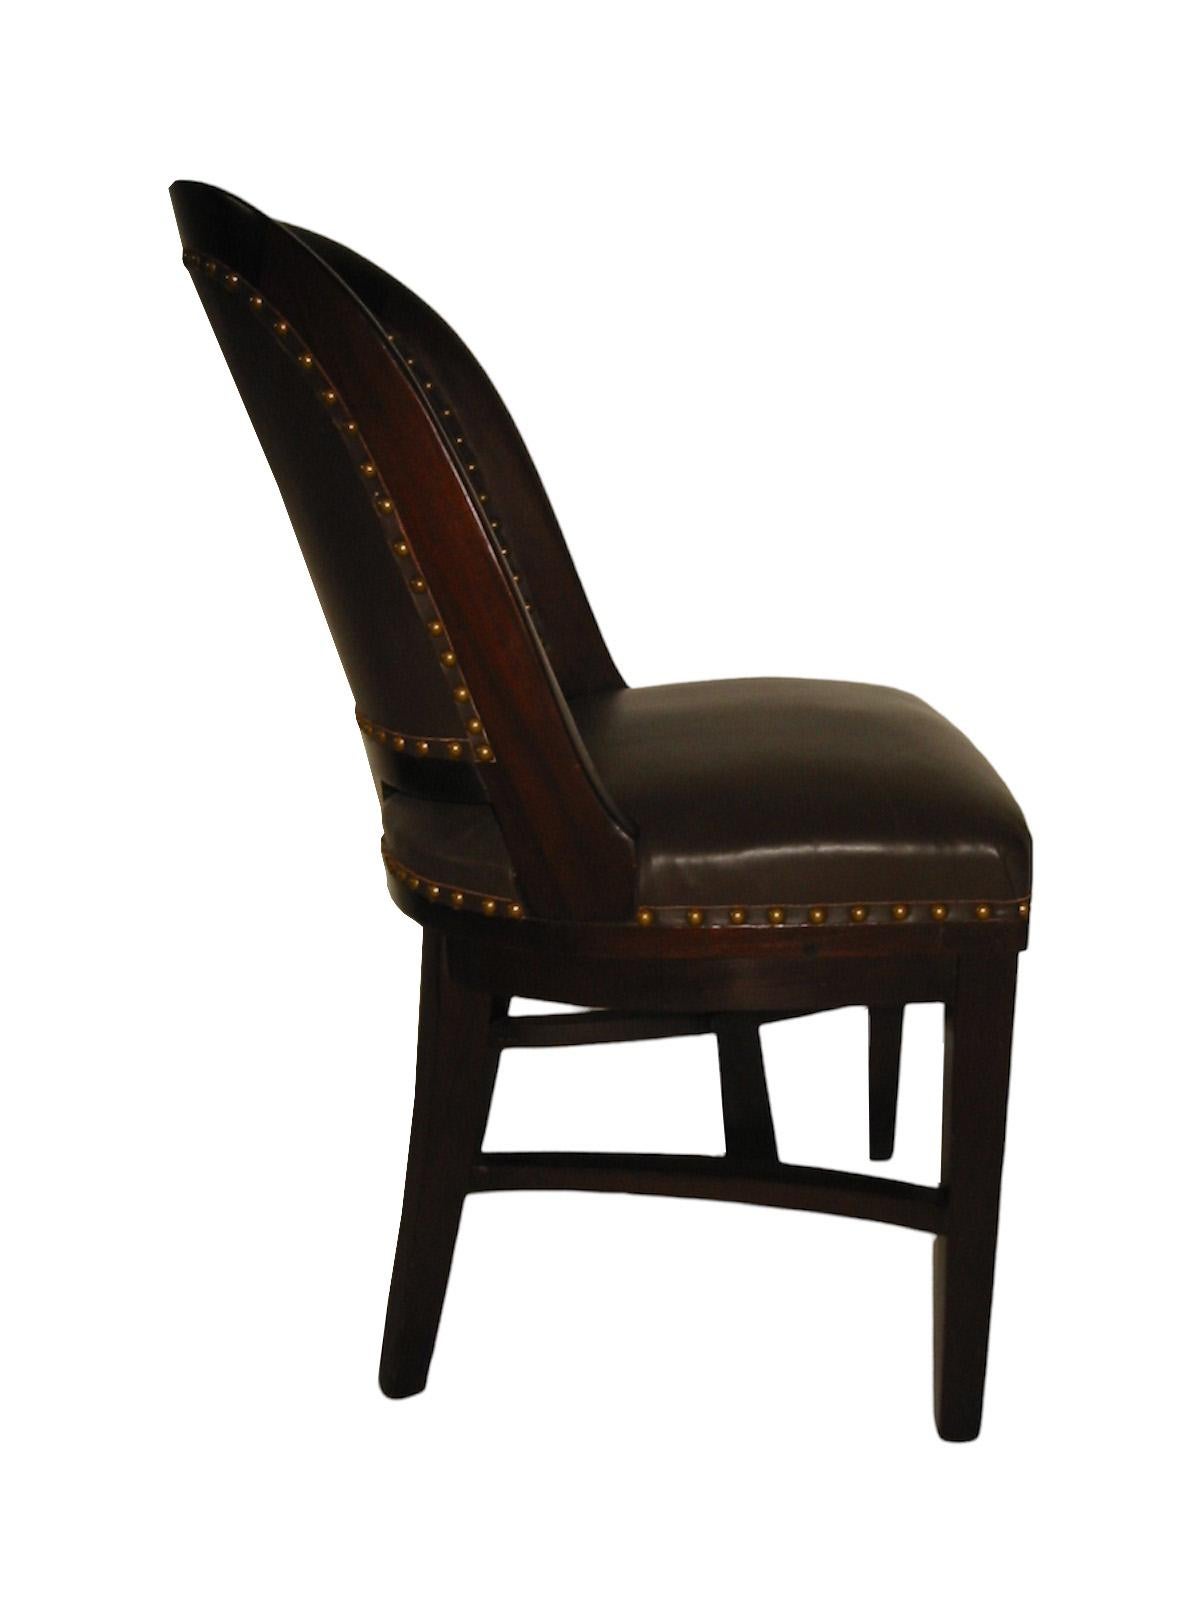 19th century leather bank chair. Beautifully upholstered with a brass nail head trim. 

Property from esteemed interior designer Juan Montoya. Juan Montoya is one of the most acclaimed and prolific interior designers in the world today. Juan Montoya